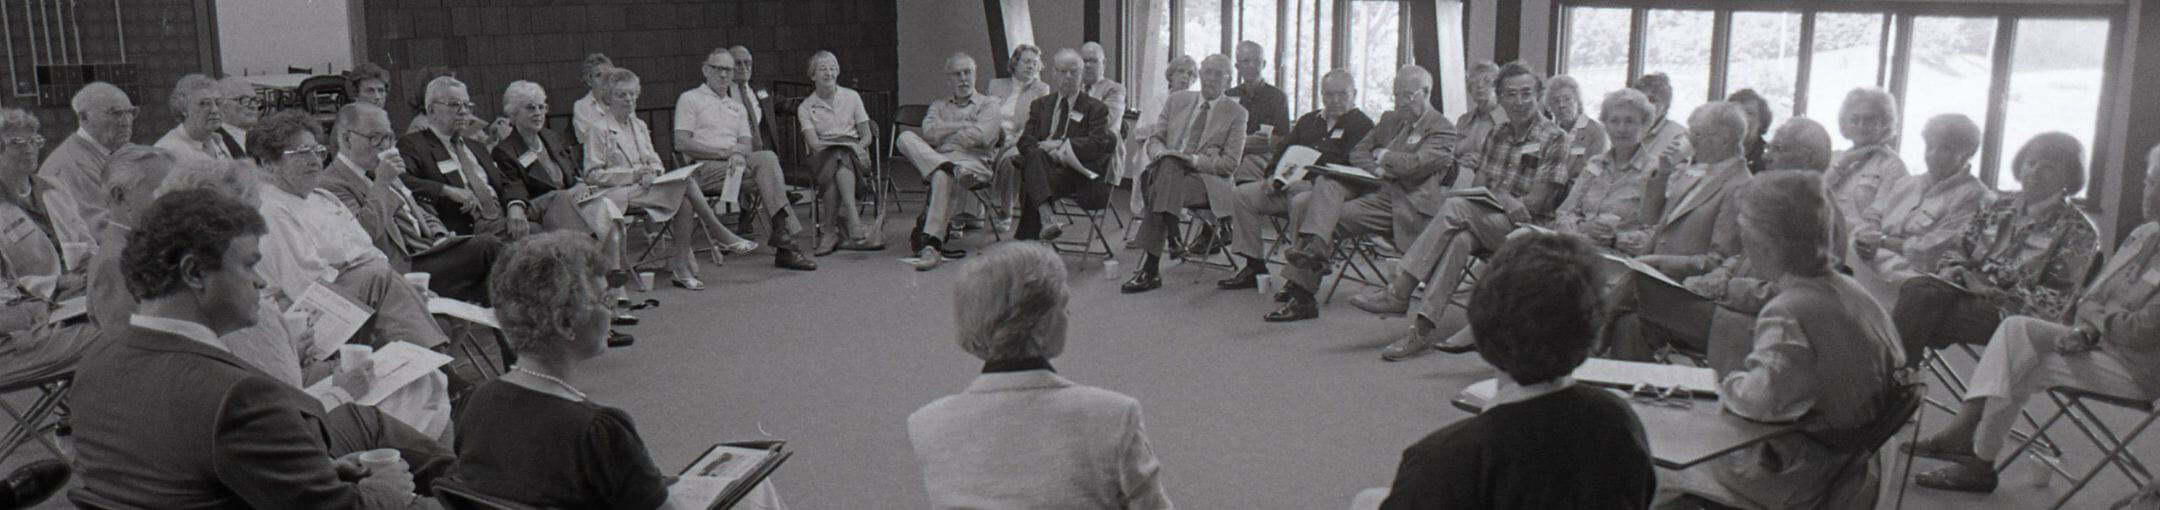 Photo from 1987 of the interior of Osher at RIT during a session.